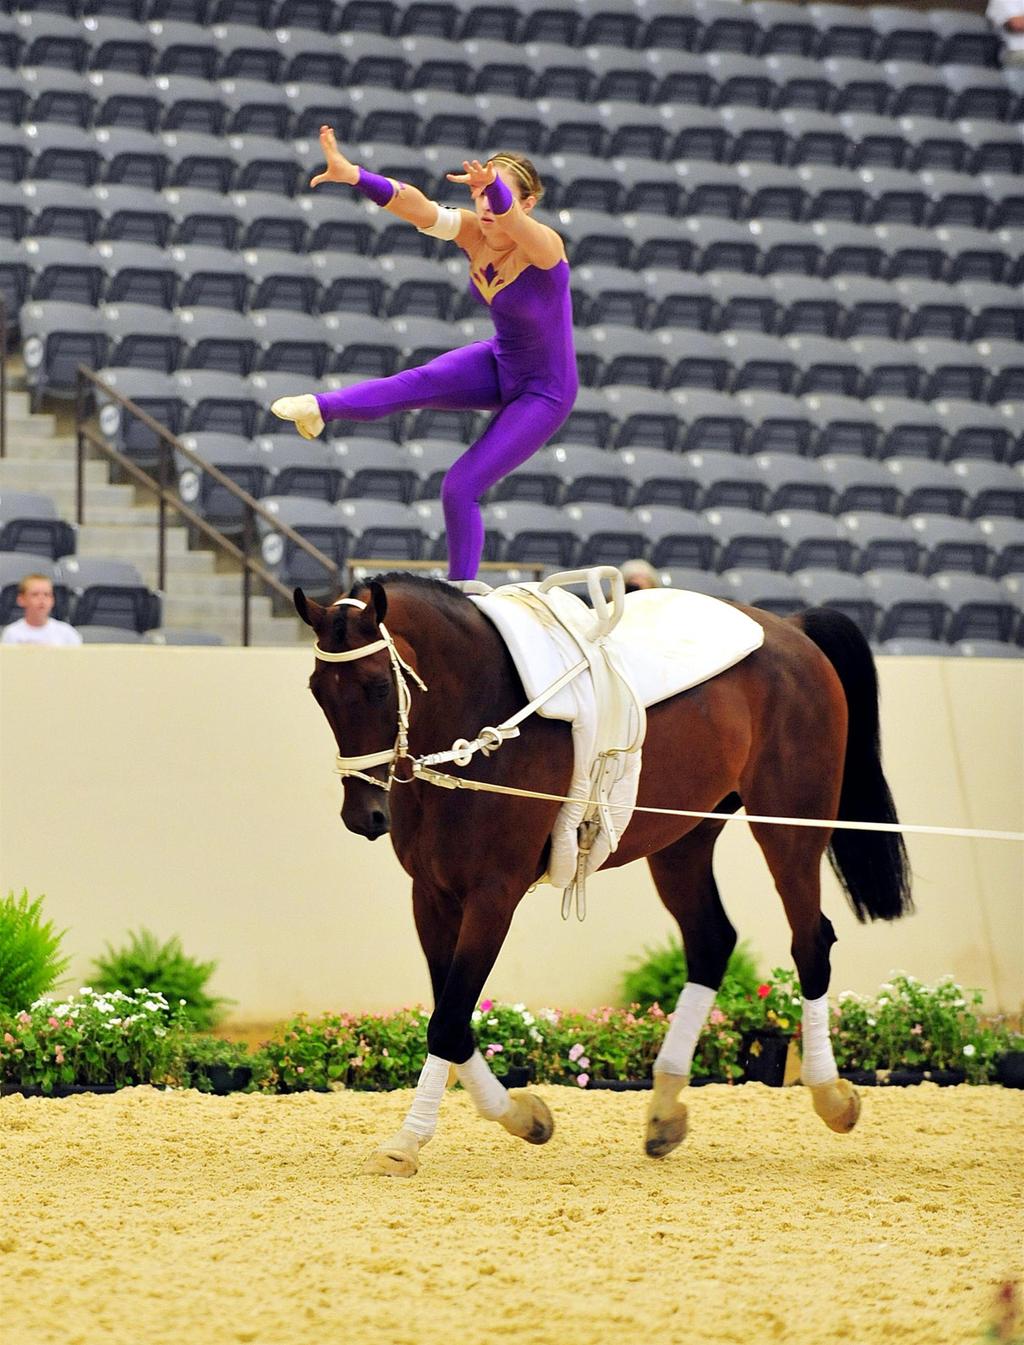 Katharine Wick Born: February 16, 1993 Residence: Hillsborough, CA Individual Female Katharine Wick began vaulting over 10 years ago with Woodside Vaulters in Woodside, CA, one of the most